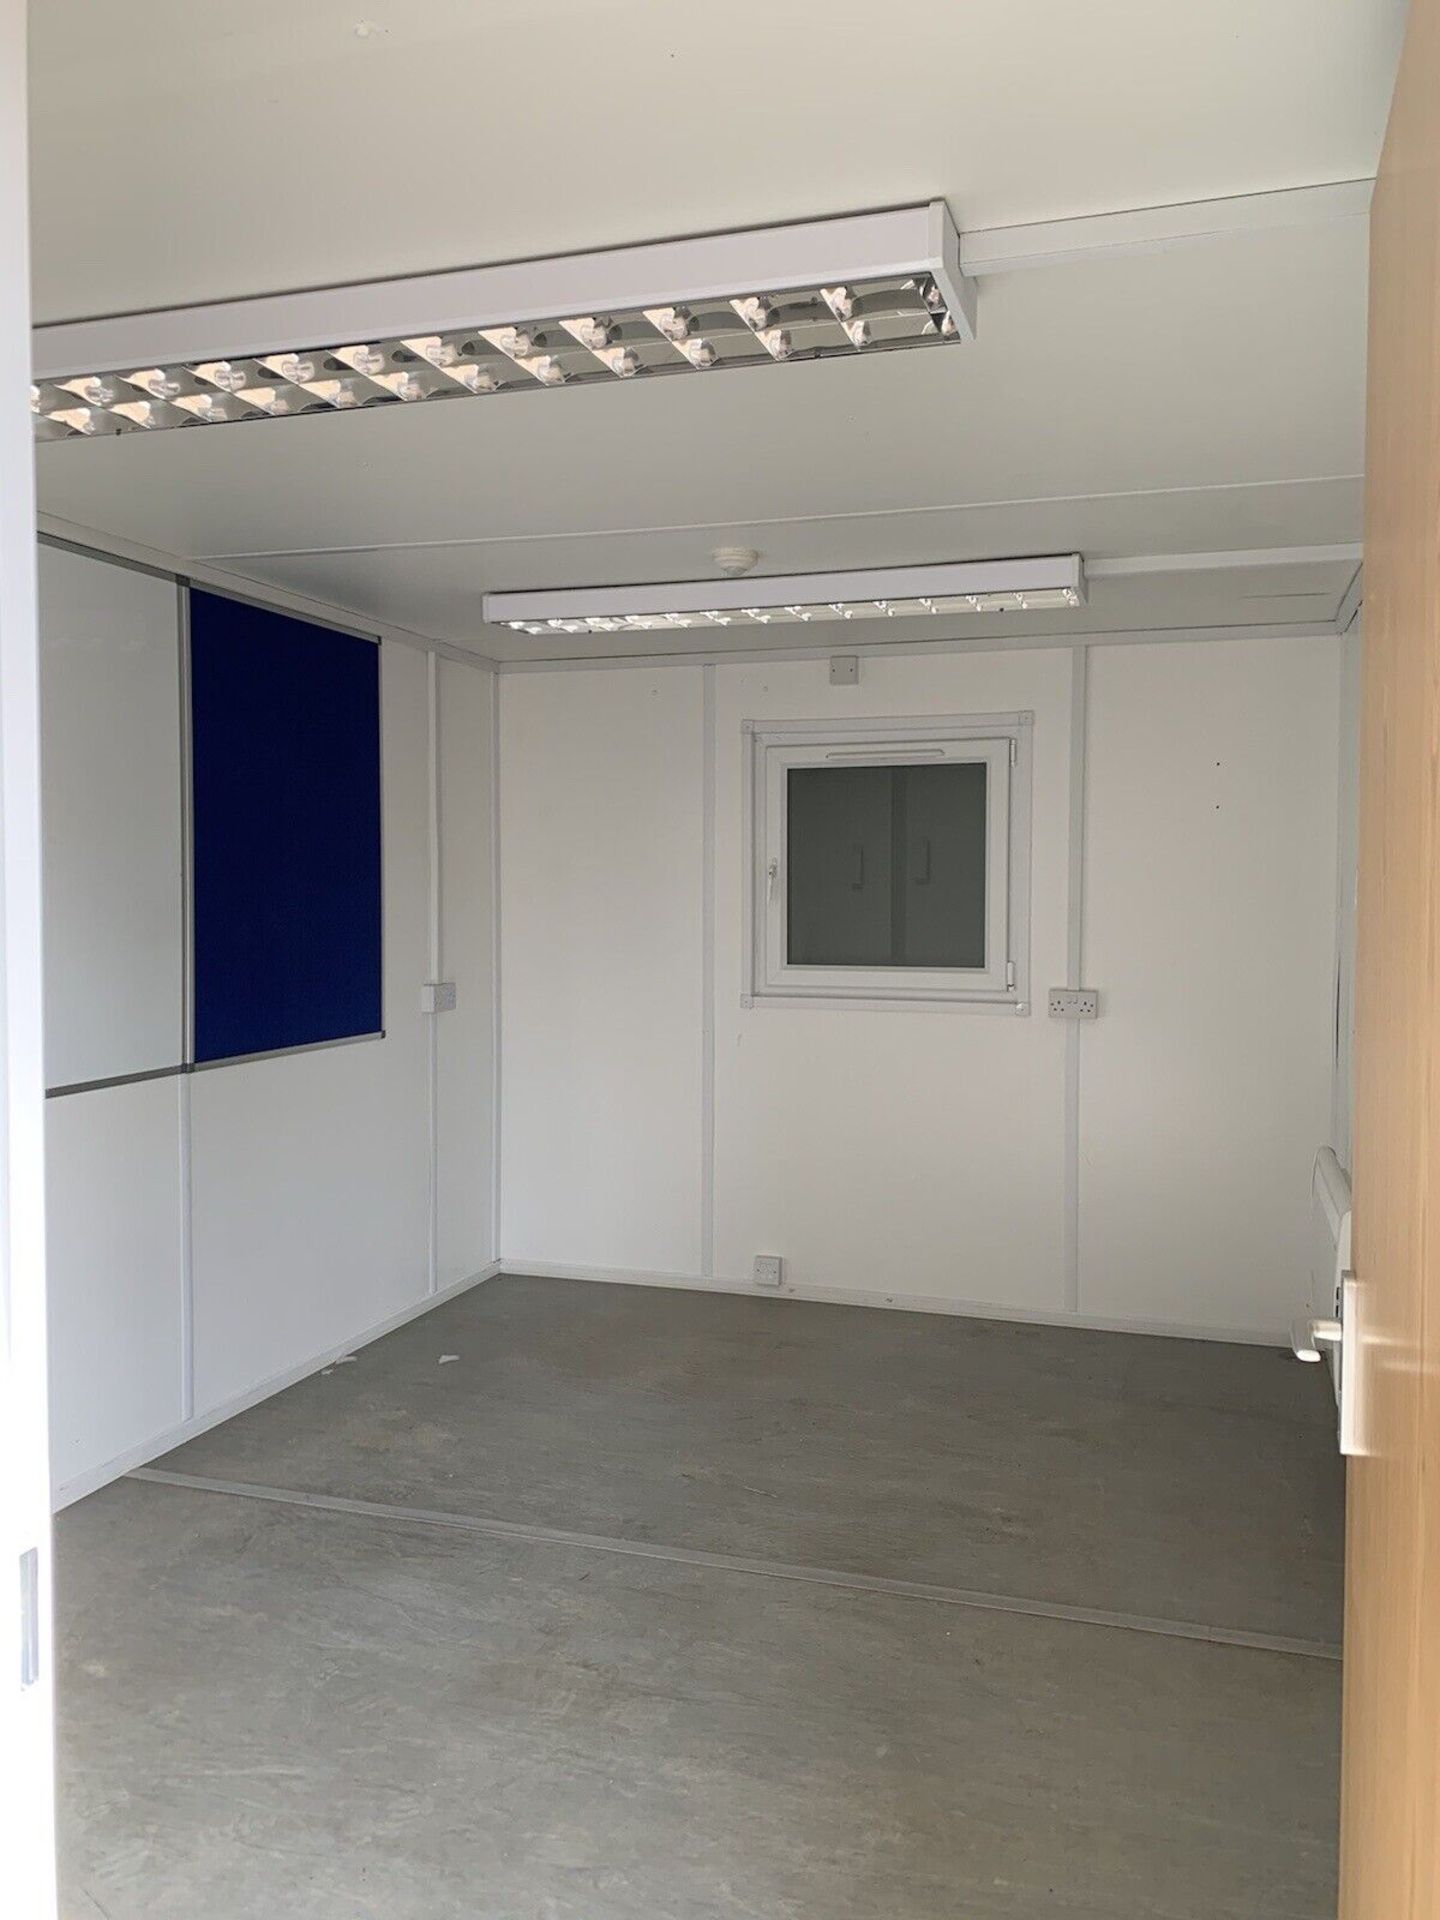 2 x 32ft Portable Offices that join together side-by-side - includes Site Cabin Canteen, Welfare Uni - Image 11 of 11